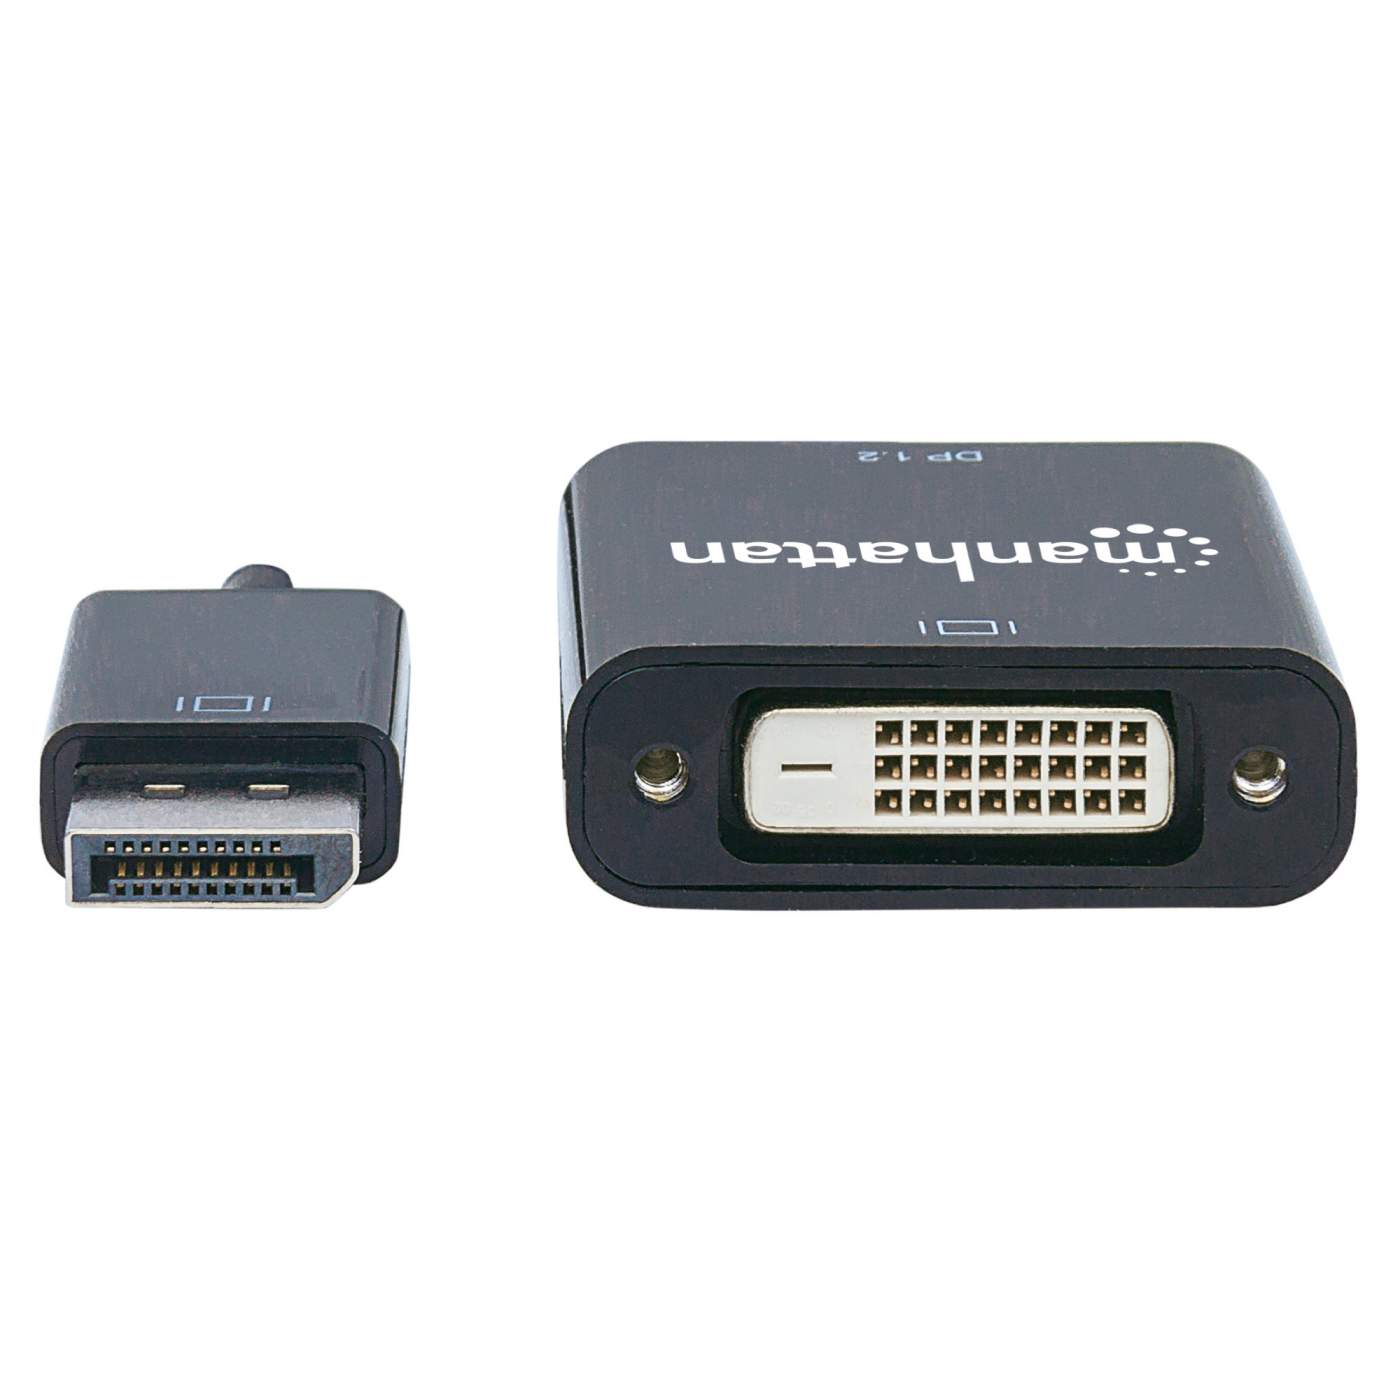 DisplayPort 1.2a to DVI-D Adapter Image 4